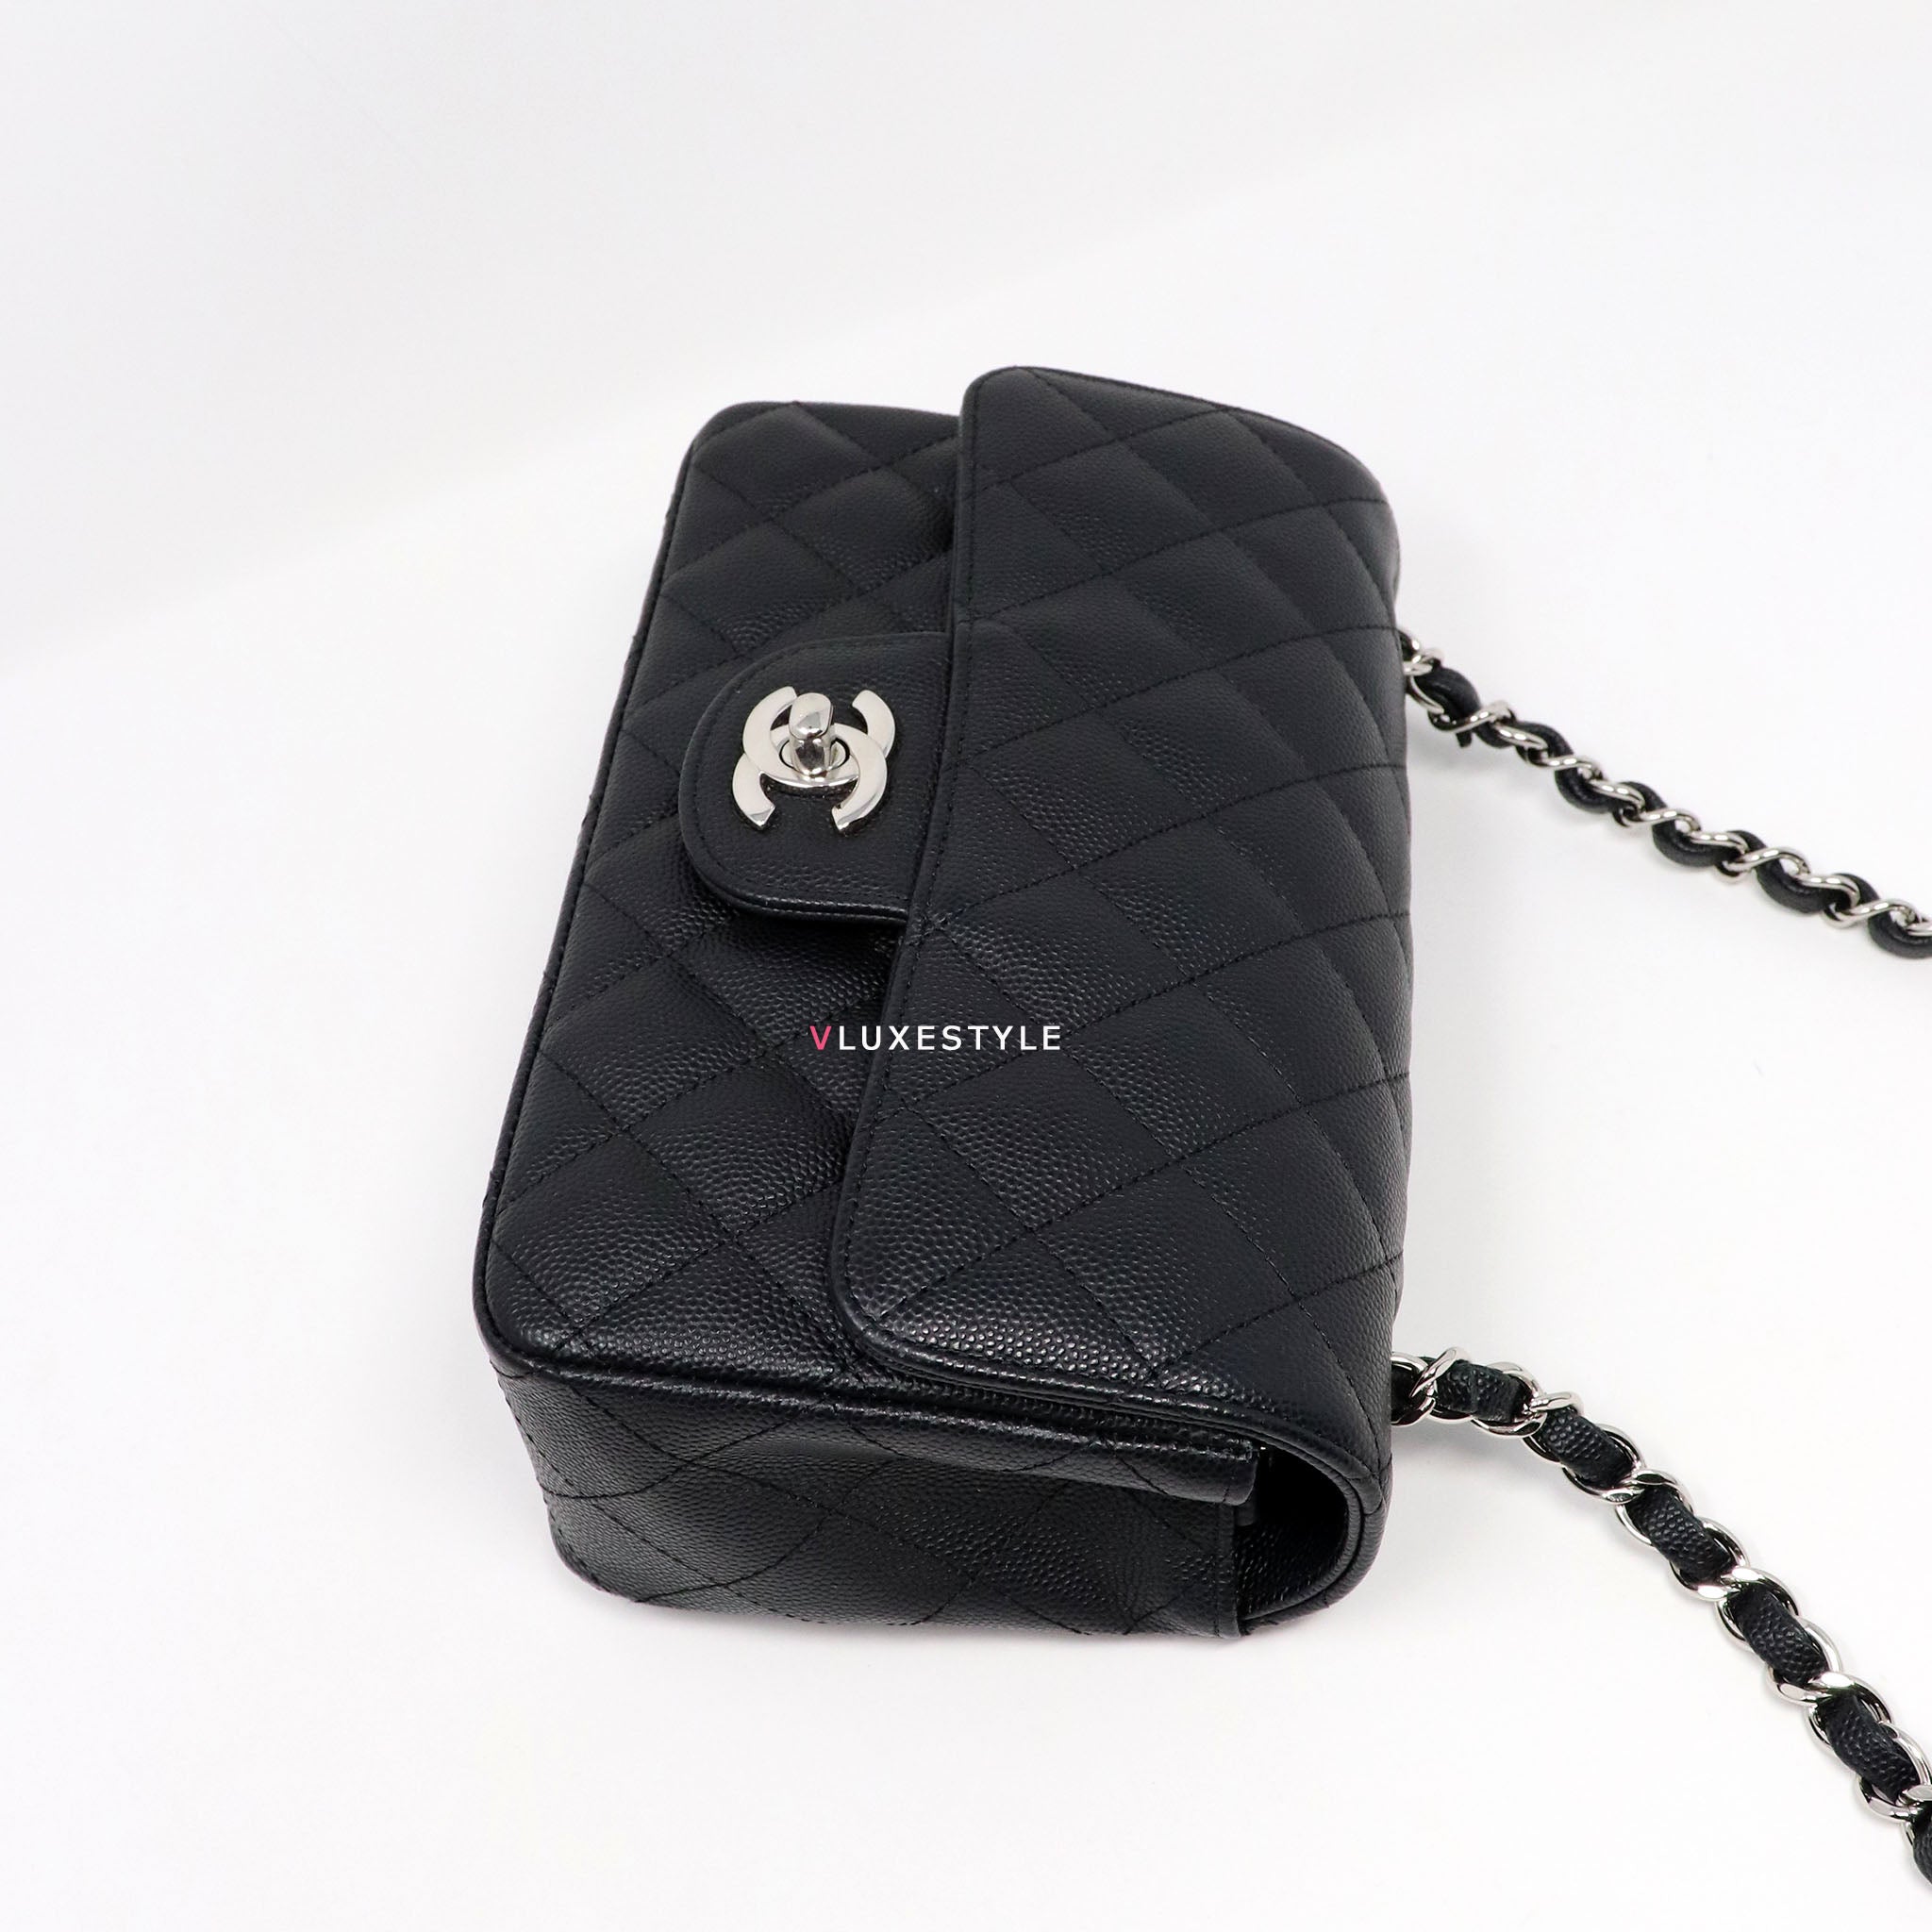 Chanel Classic O Case Pouch Quilted Caviar Mini Black 1159181